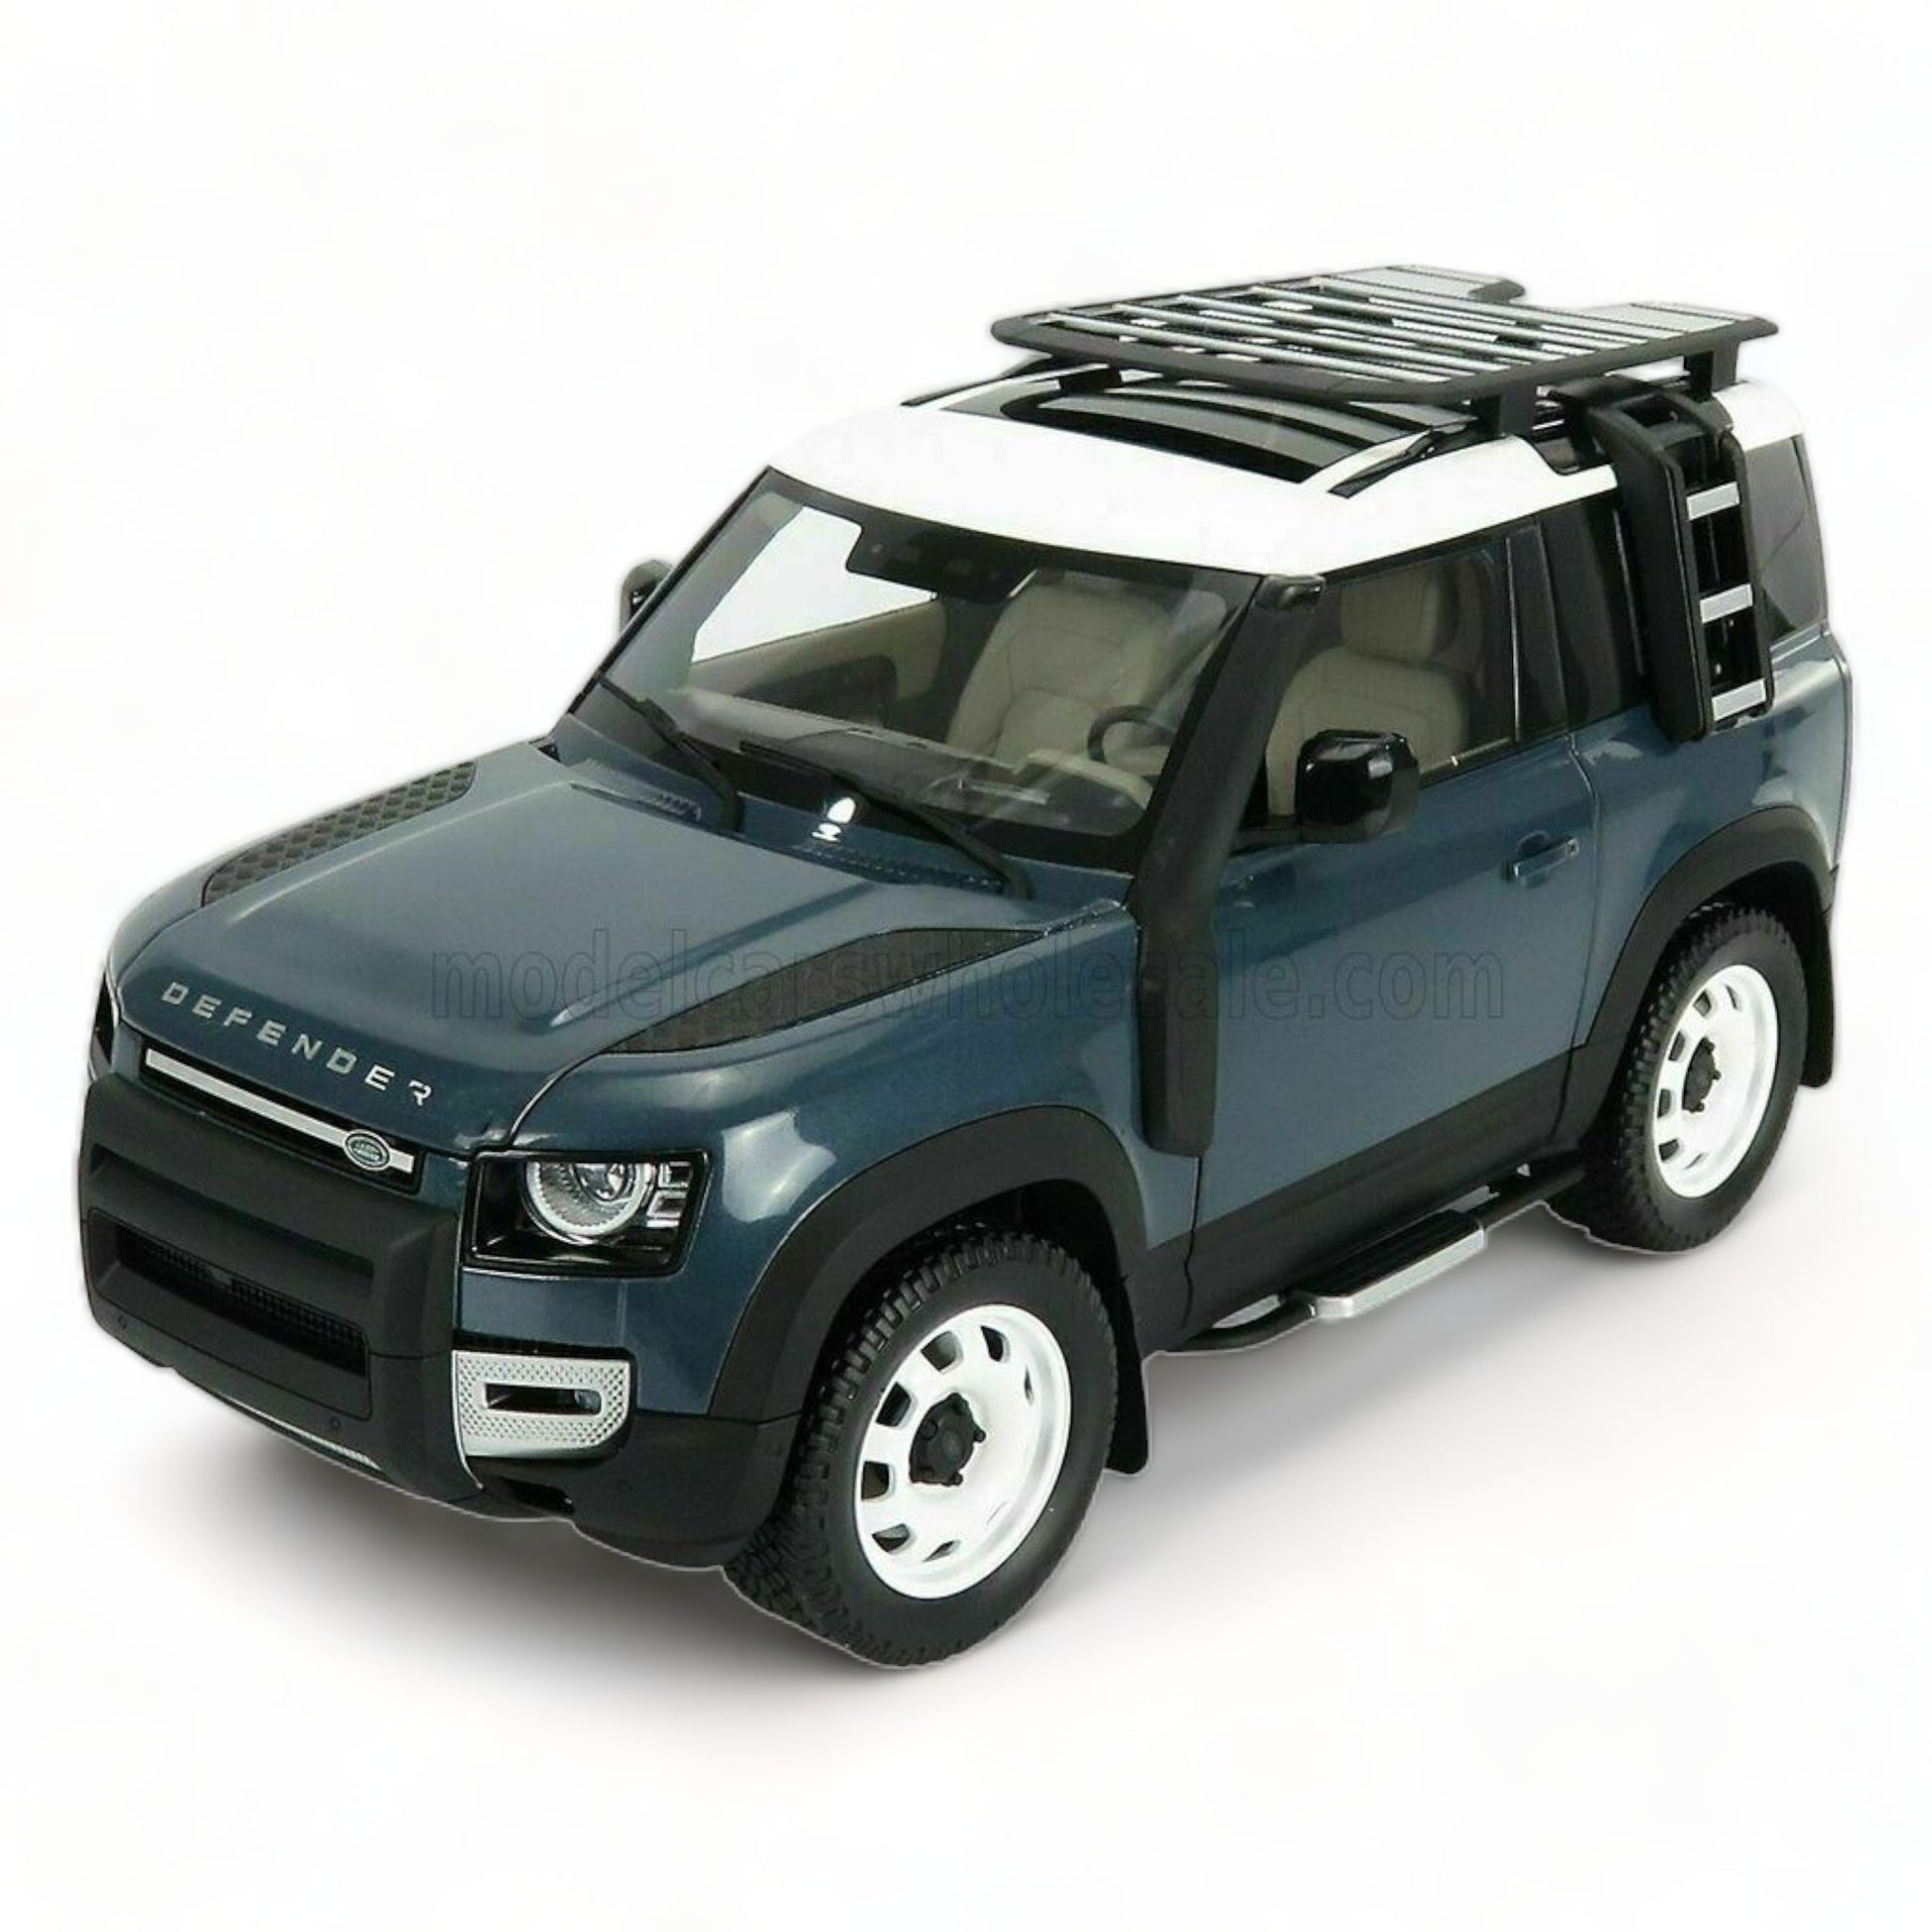 1/18 Diecast  Land Rover Defender 90 Blue by Almost Real Scale Model Car|Sold in Dturman.com Dubai UAE.